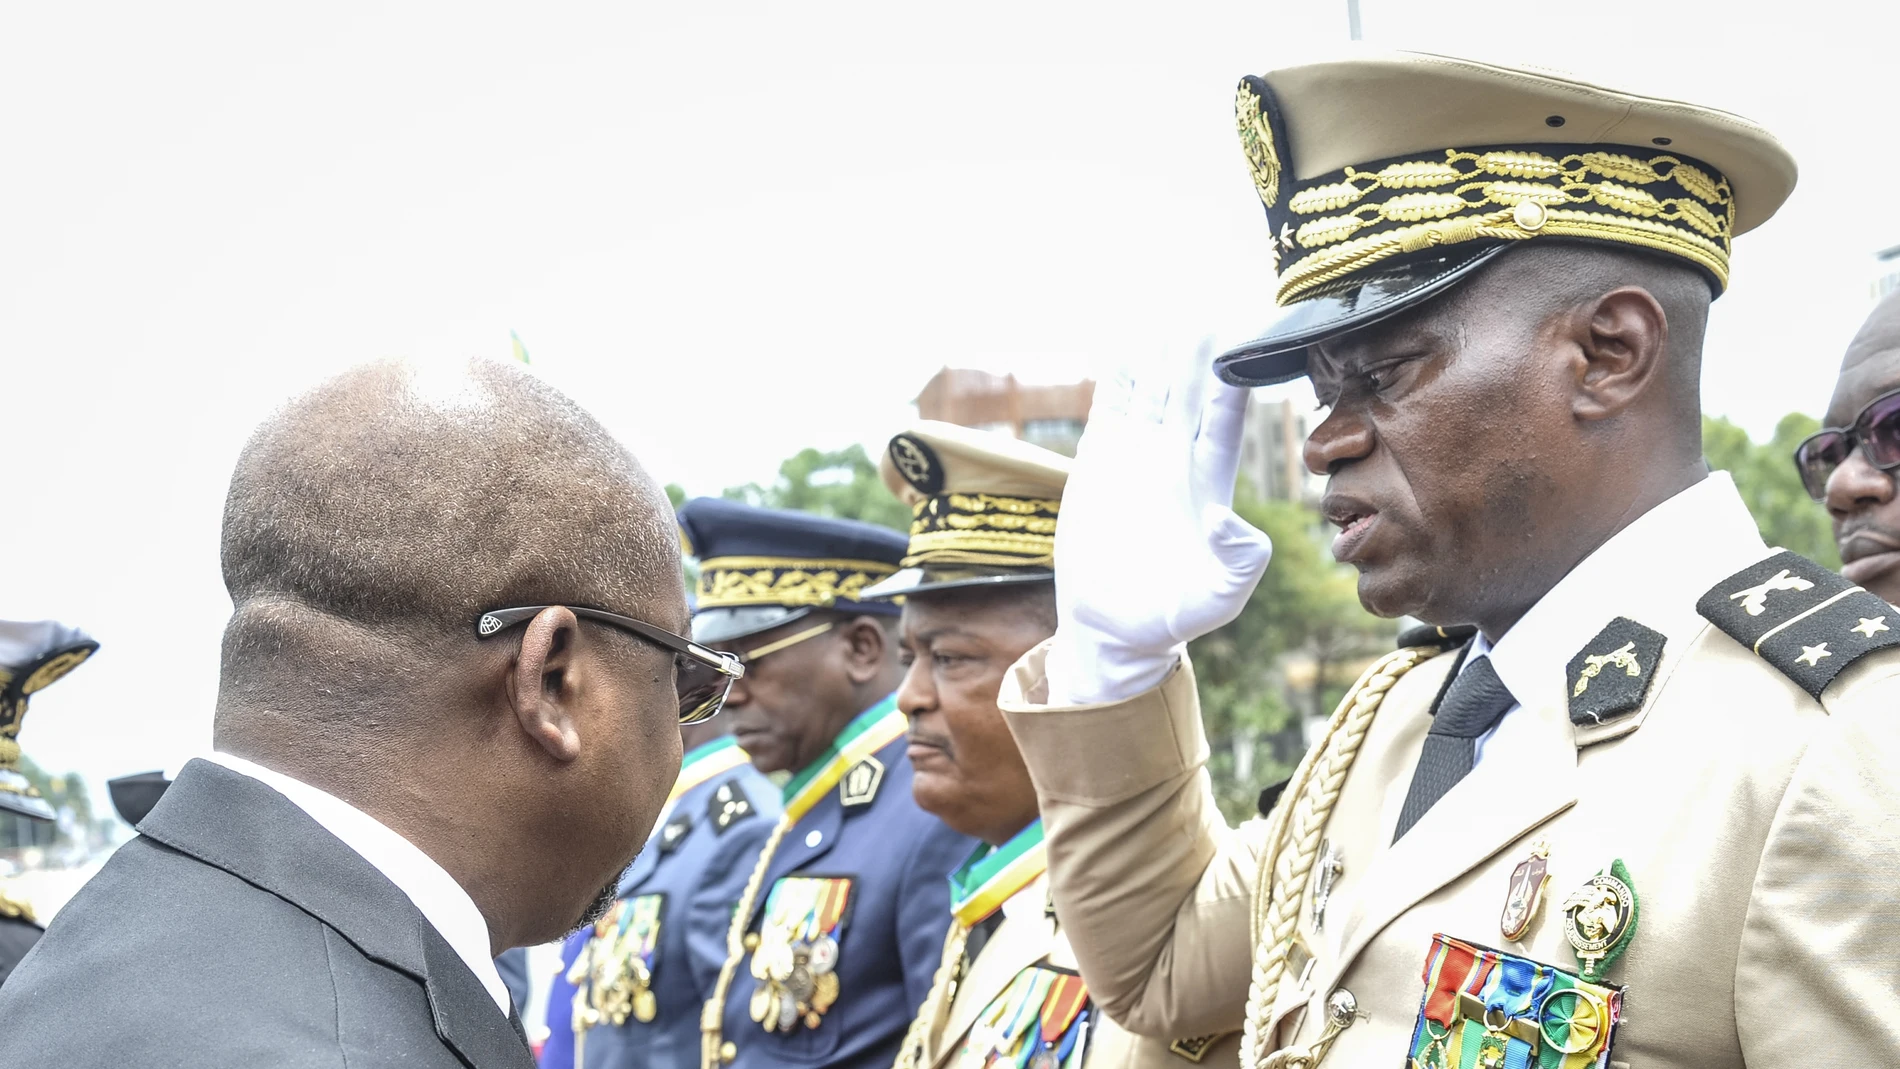  Head of Gabon's elite Republican Guard, General Brice Oligui Nguema (R), is decorated by Gabon Prime Minister Alain Claude Bilie Bie Nze (L) in Libreville on August 16, 2023 during celebrations ahead of Gabon Independence day celebrated on August 17, 2023.